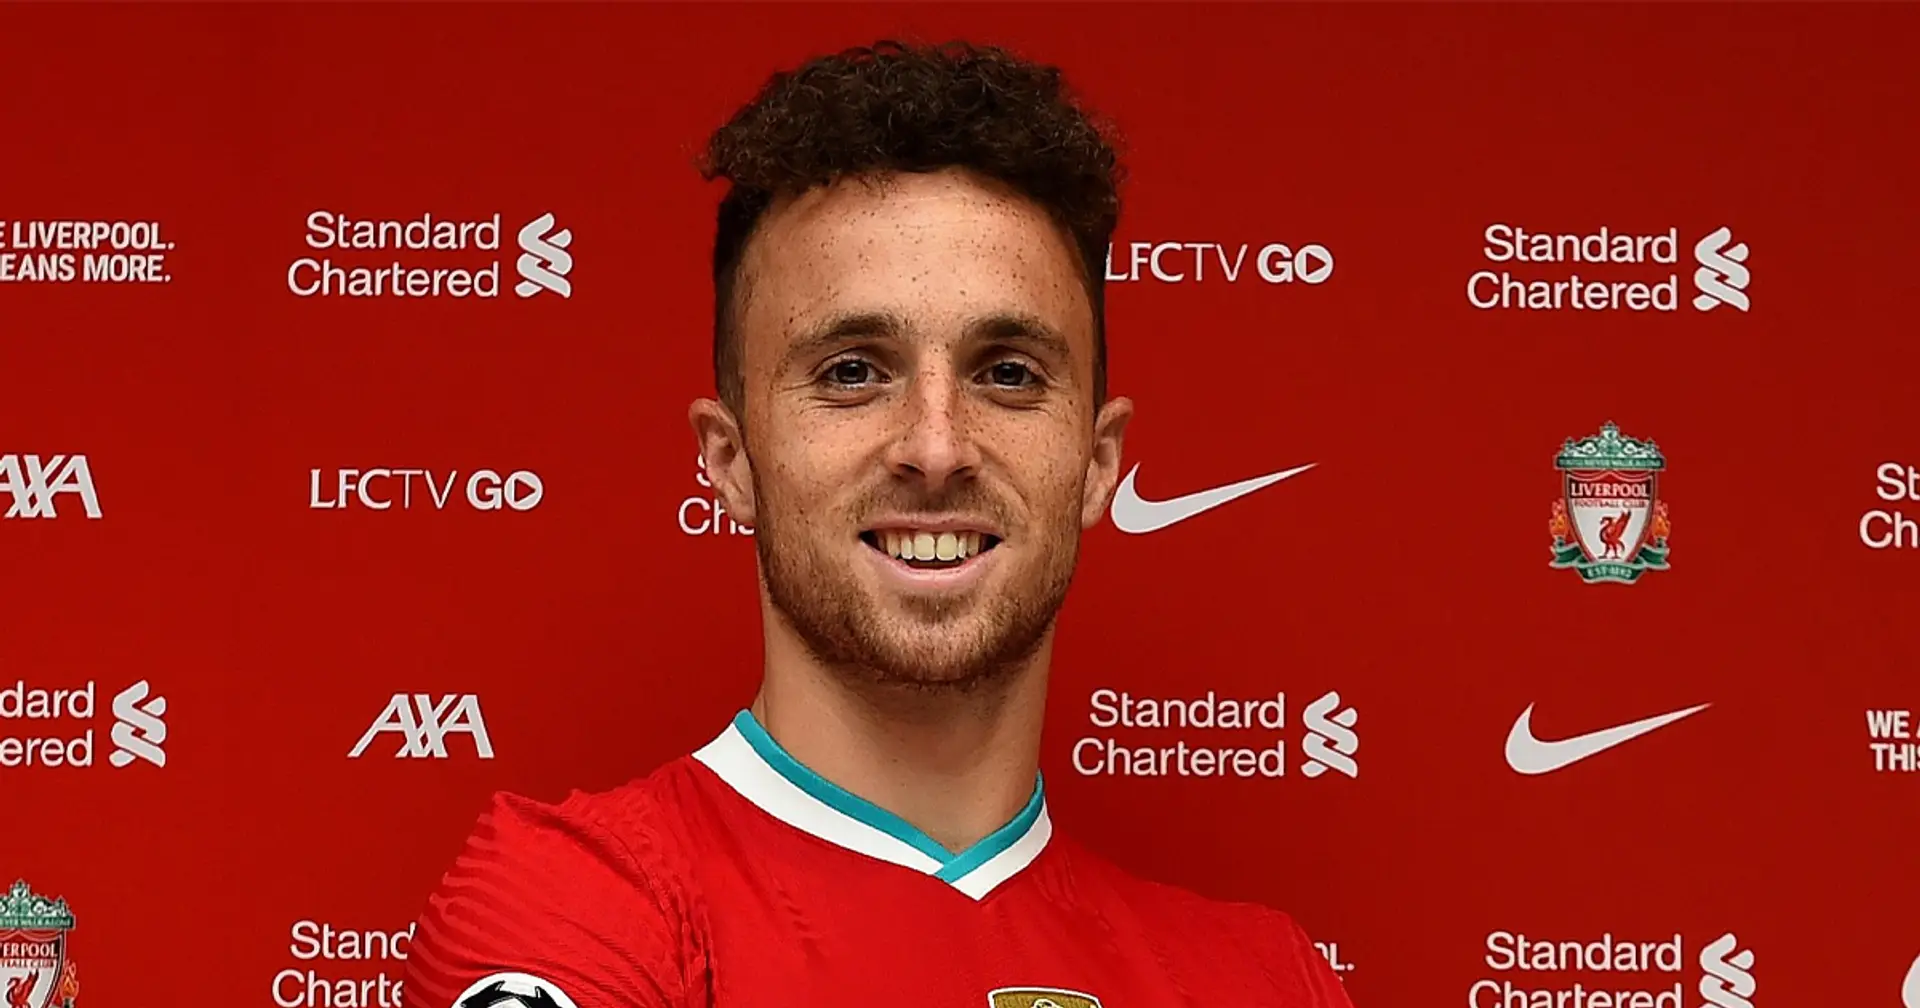 OFFICIAL: Diogo Jota joins Liverpool